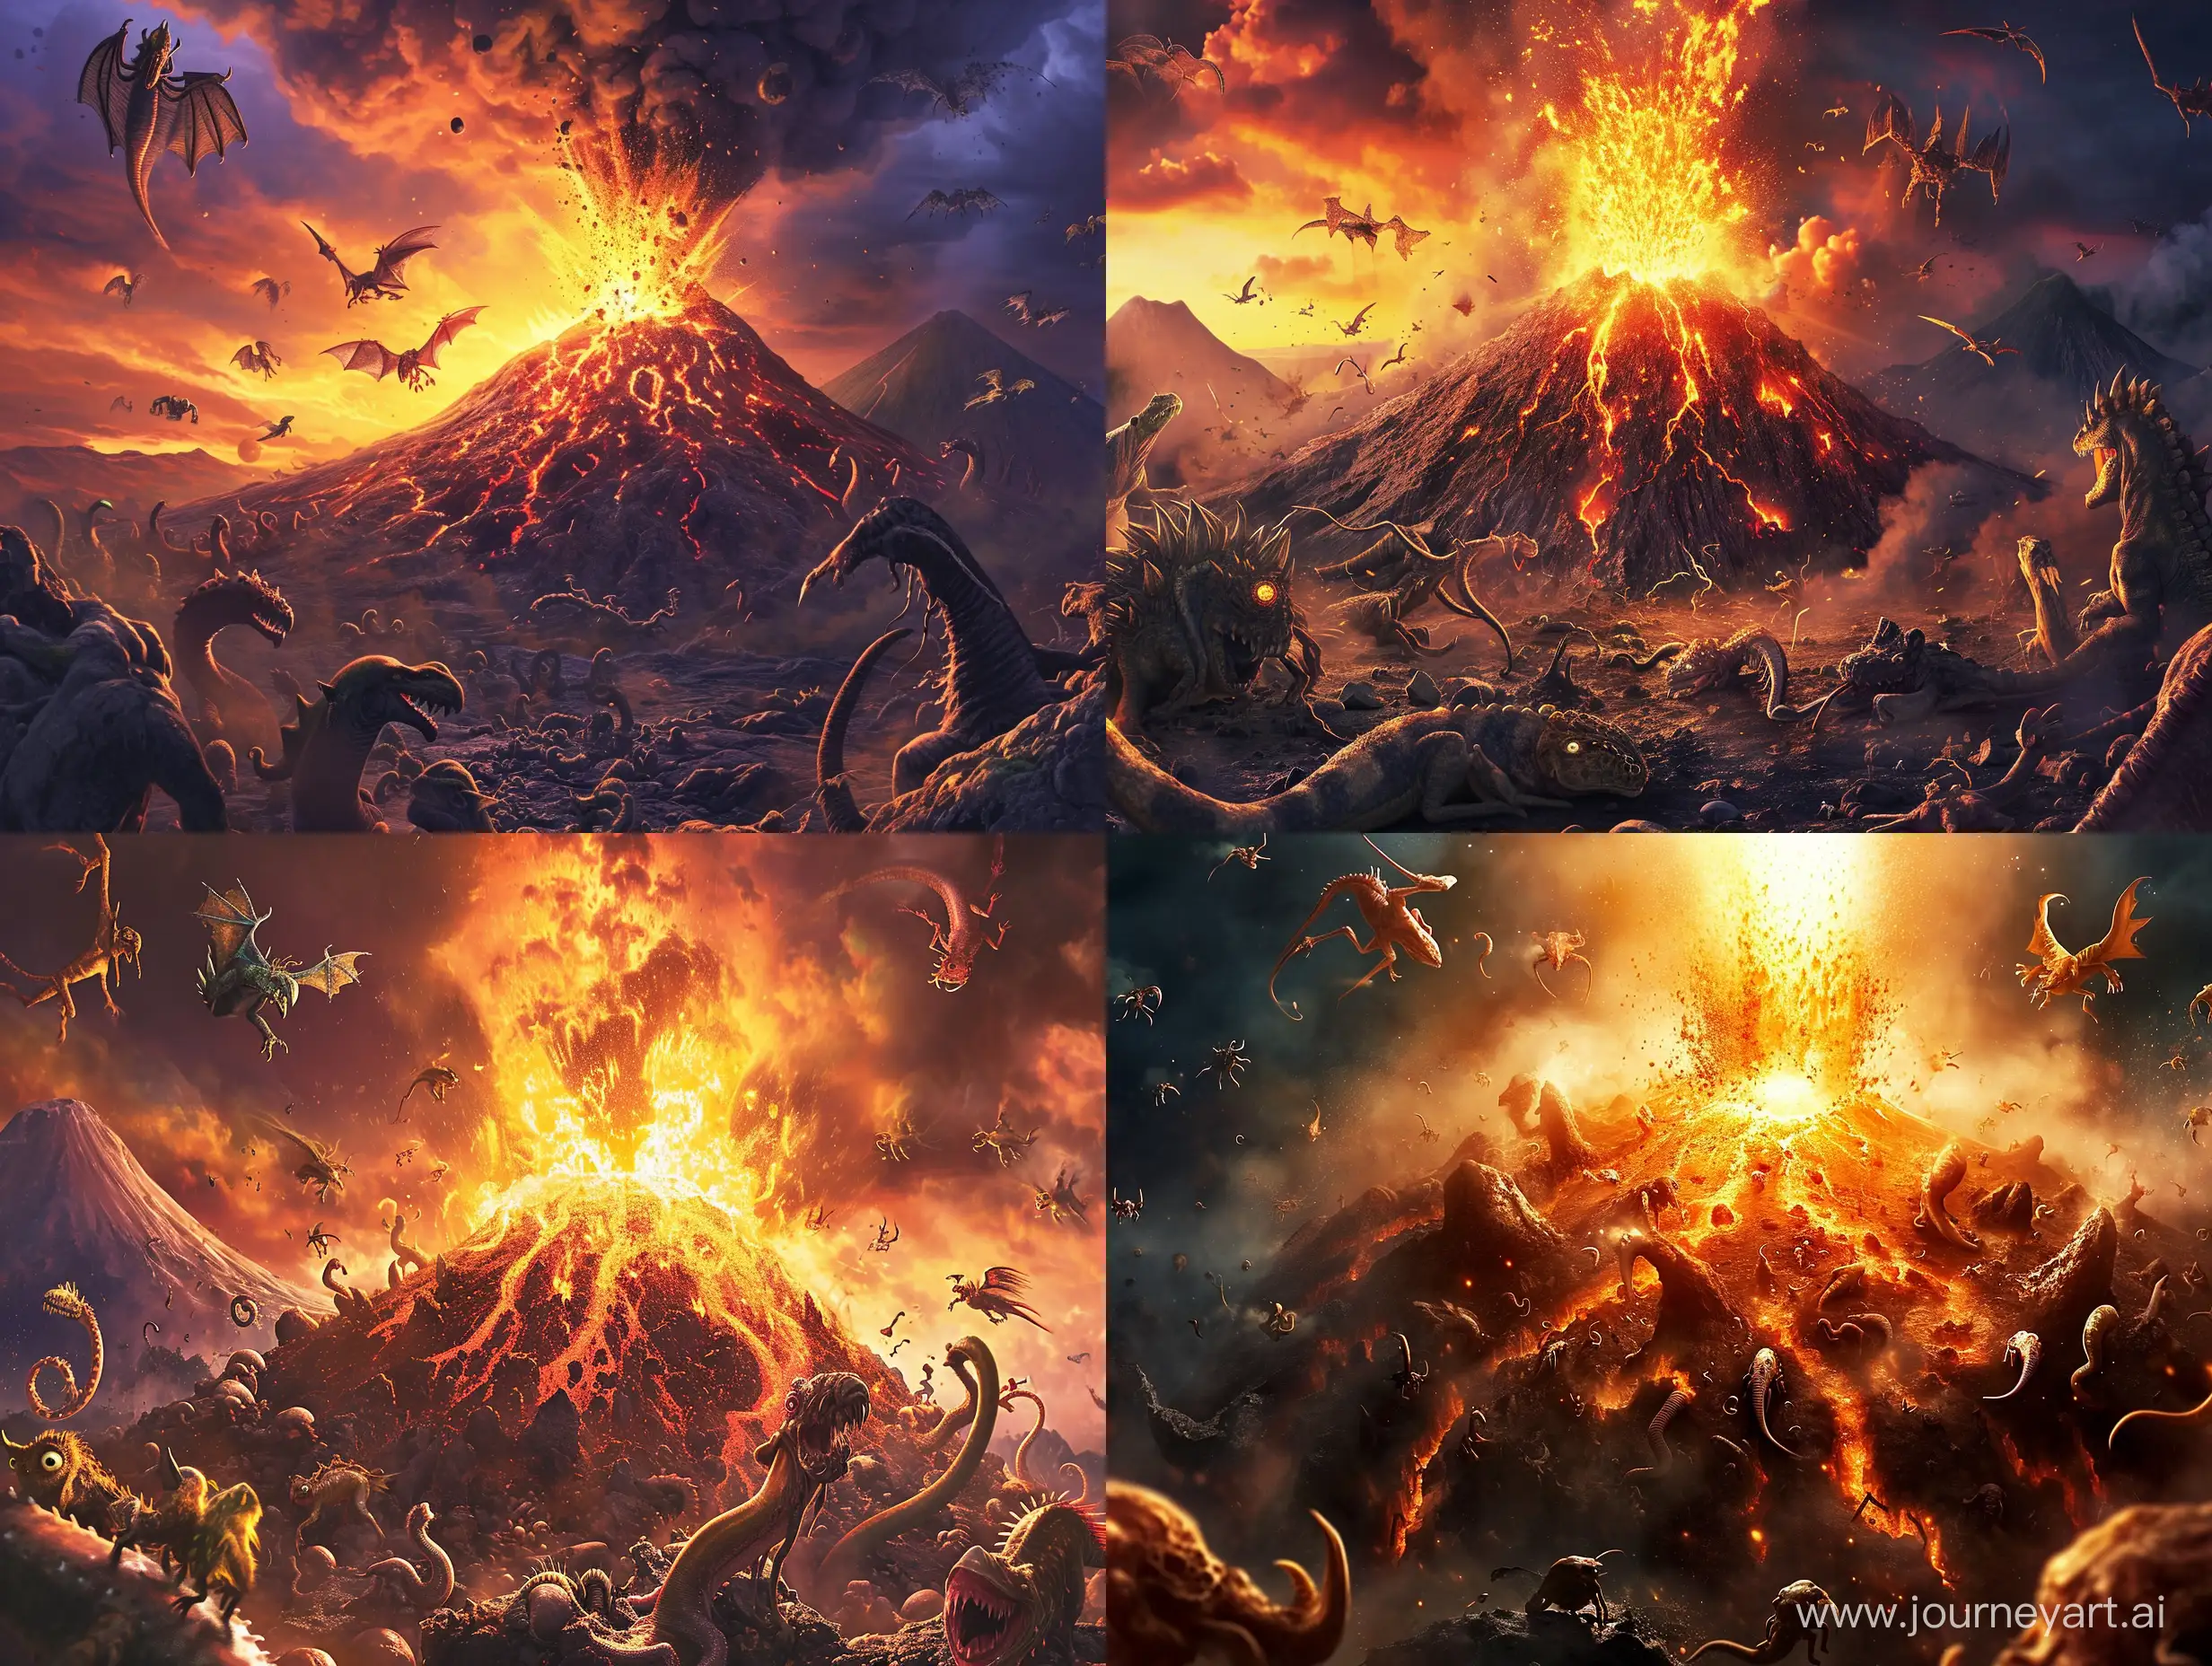 Epic-Volcanic-Planet-Eruption-with-Witnessing-Creatures